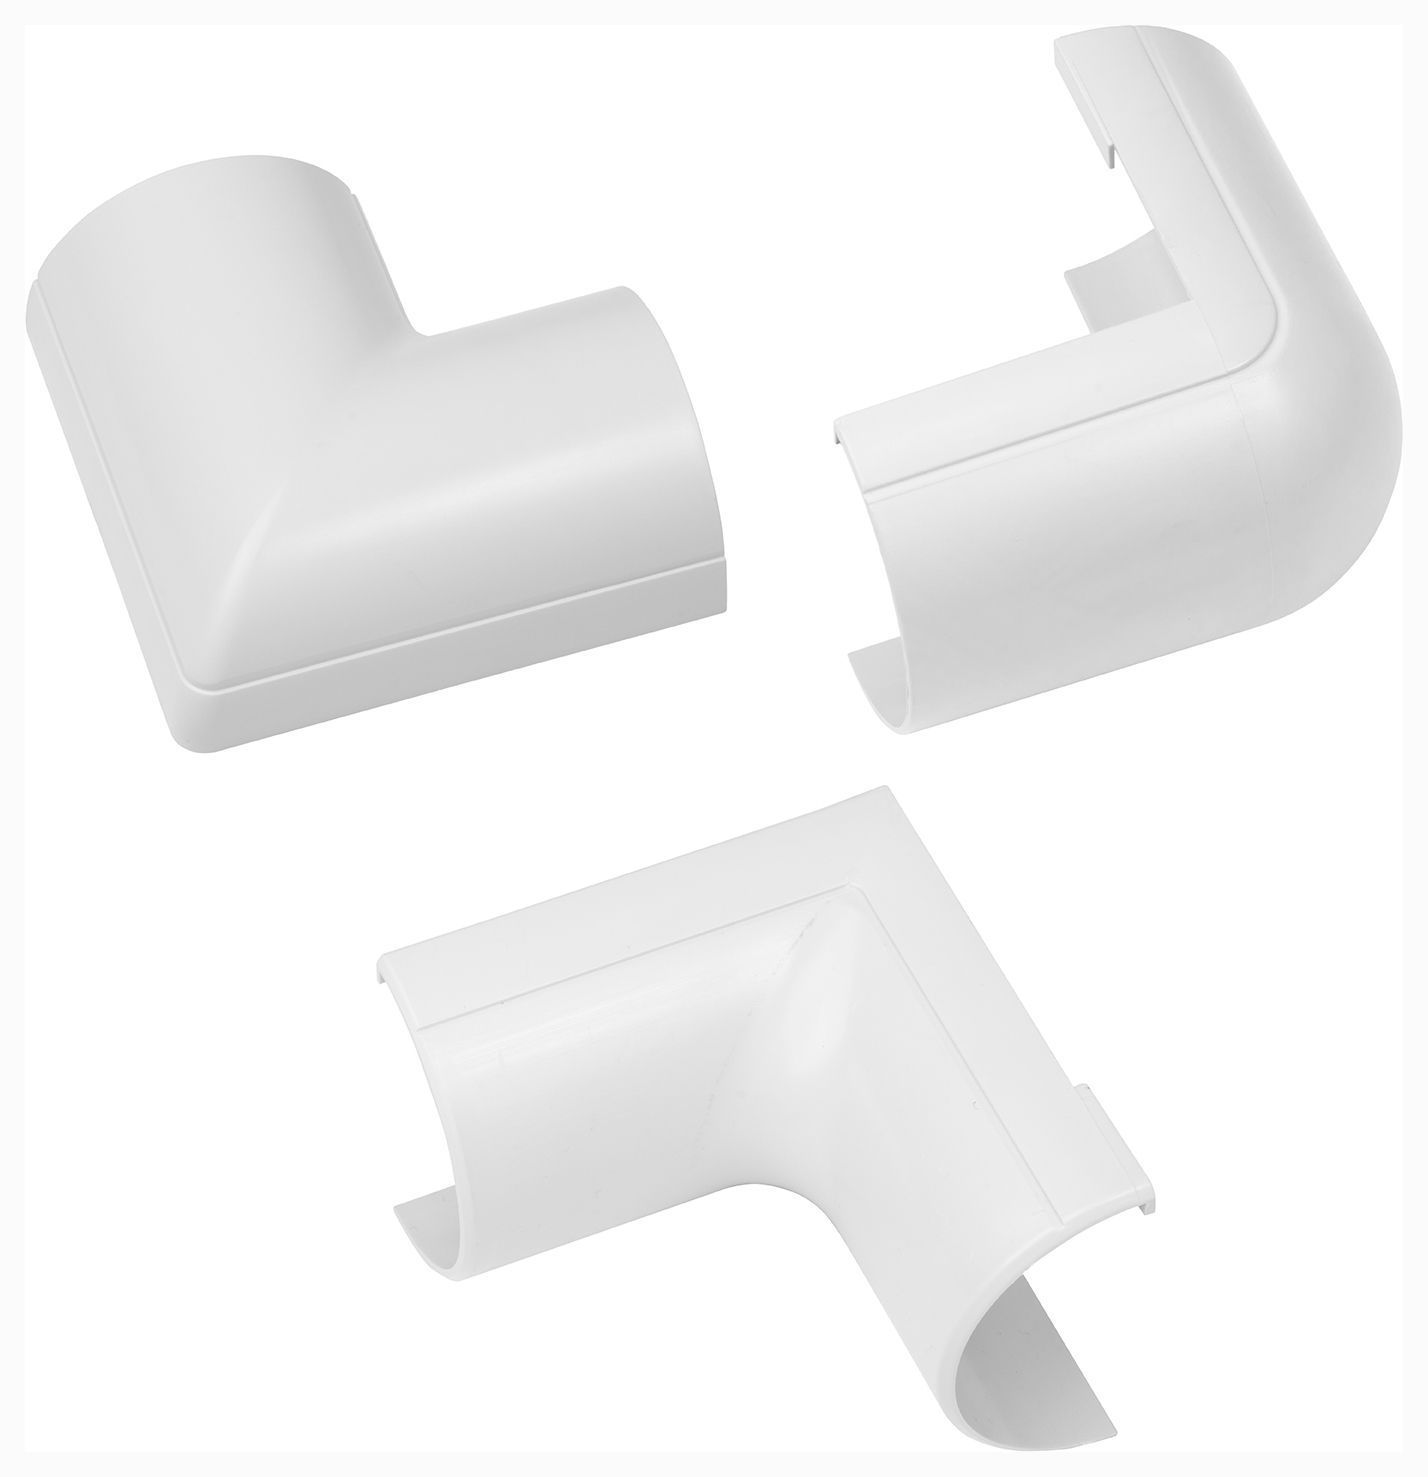 D-Line 50 x 25mm Trunking Accessory Multi-Pack - Pack of 3